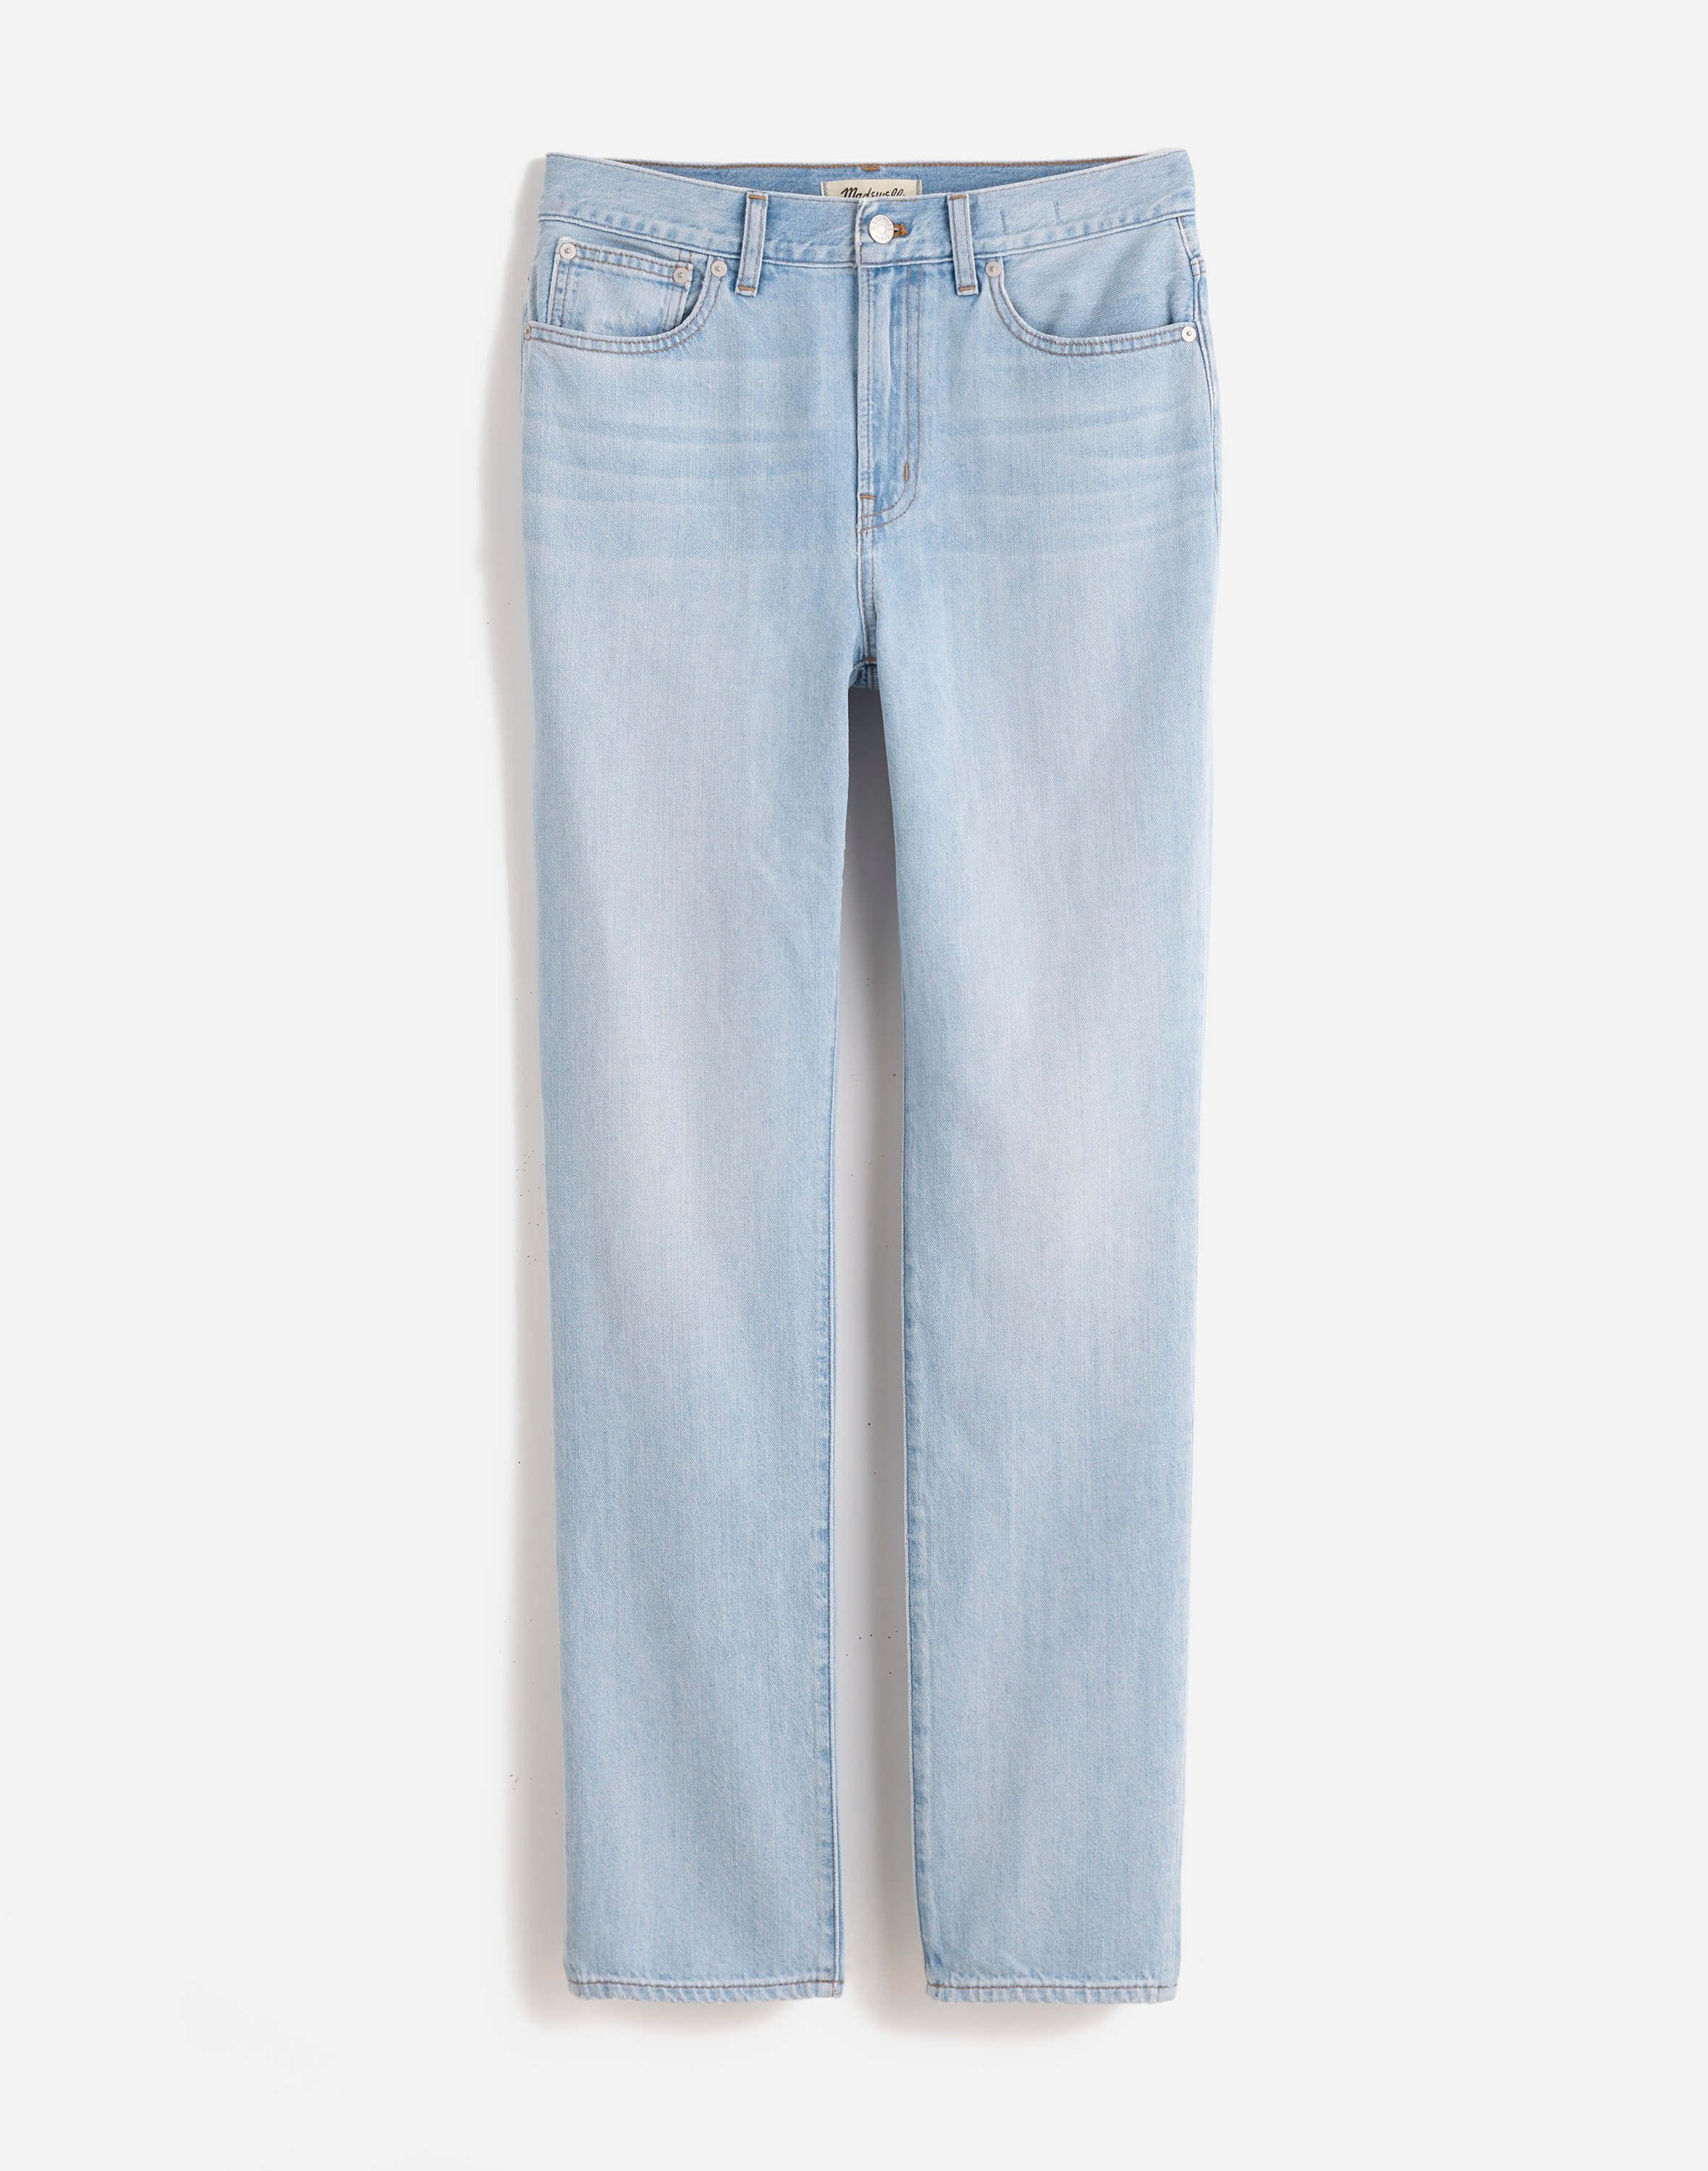 Mw The Perfect Vintage Crop Jean In Fitzgerald Wash